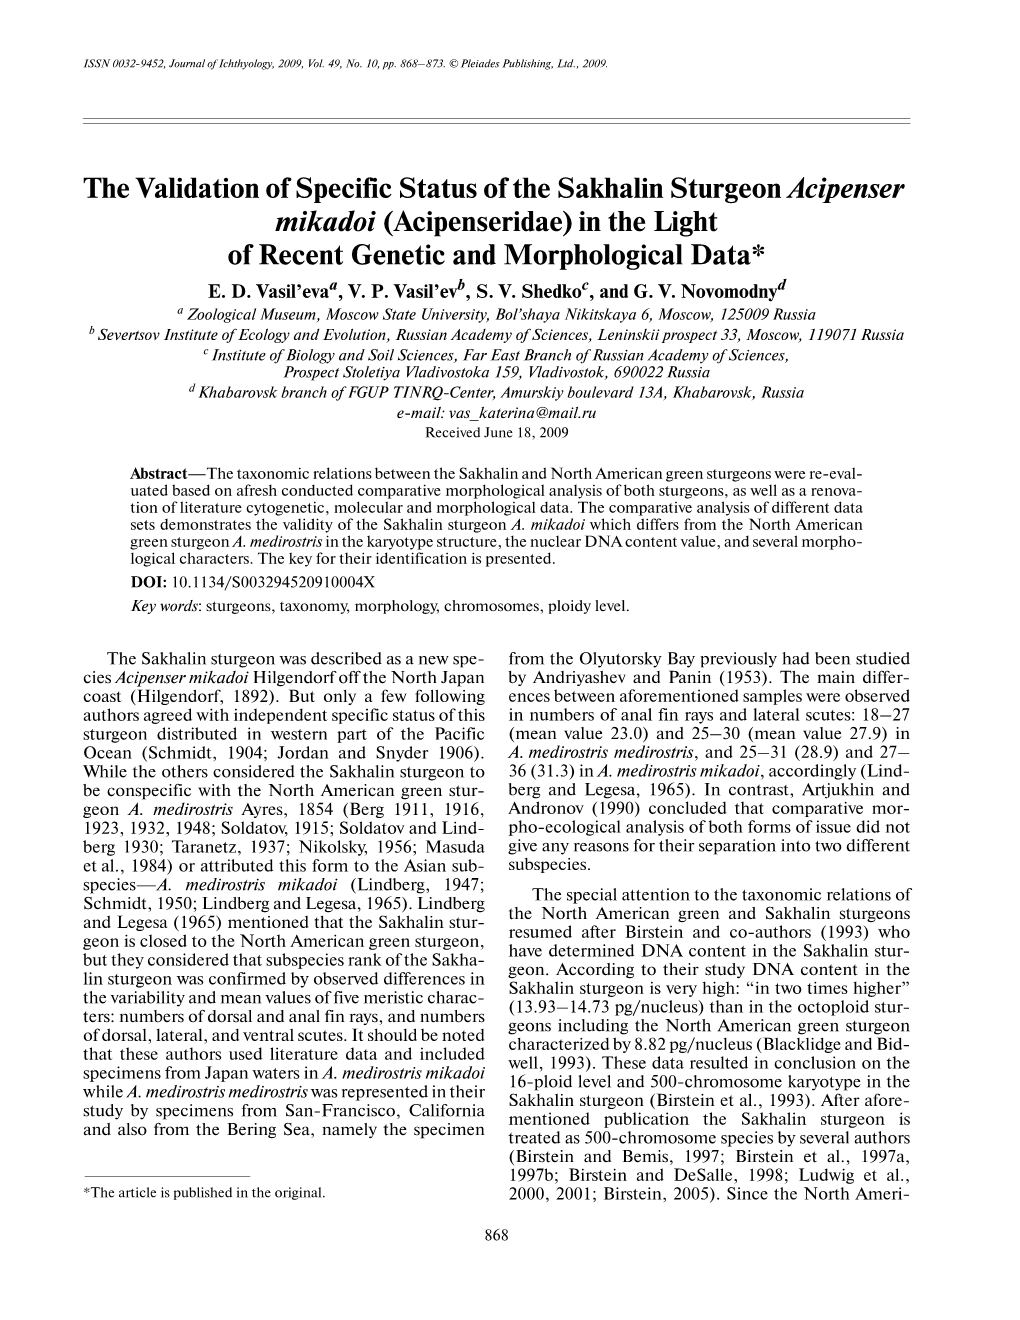 The Validation of Specific Status of the Sakhalin Sturgeon Acipenser Mikadoi (Acipenseridae) in the Light of Recent Genetic and Morphological Data* E